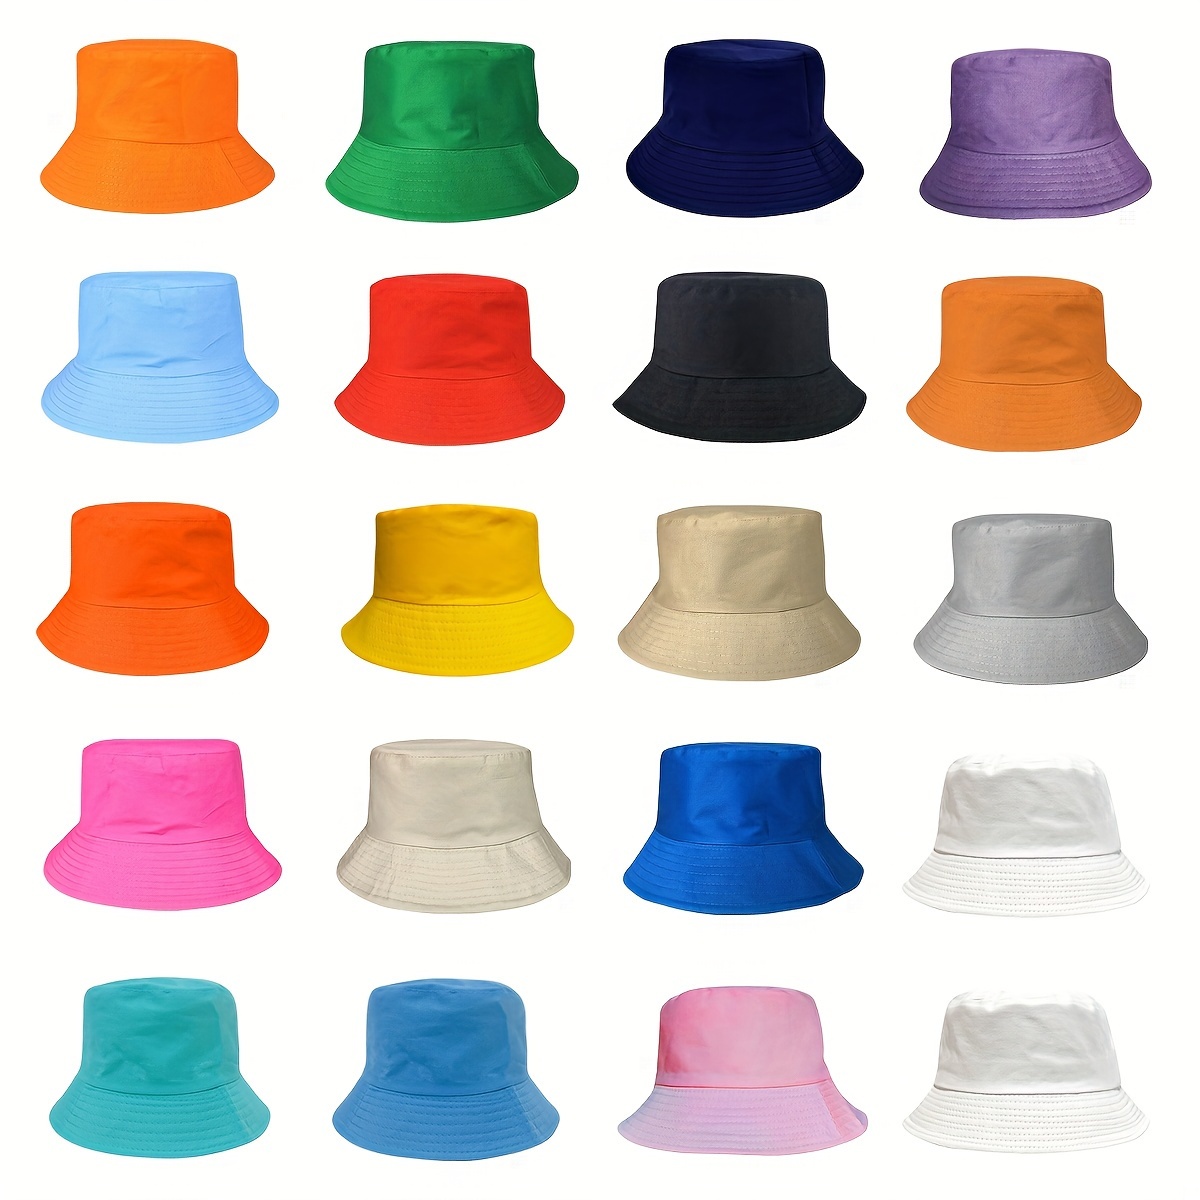 

Candy Color Casual Bucket Hat Simple Breathable Unisex Basin Hats Lightweight Sunscreen Fisherman Cap For Women Men